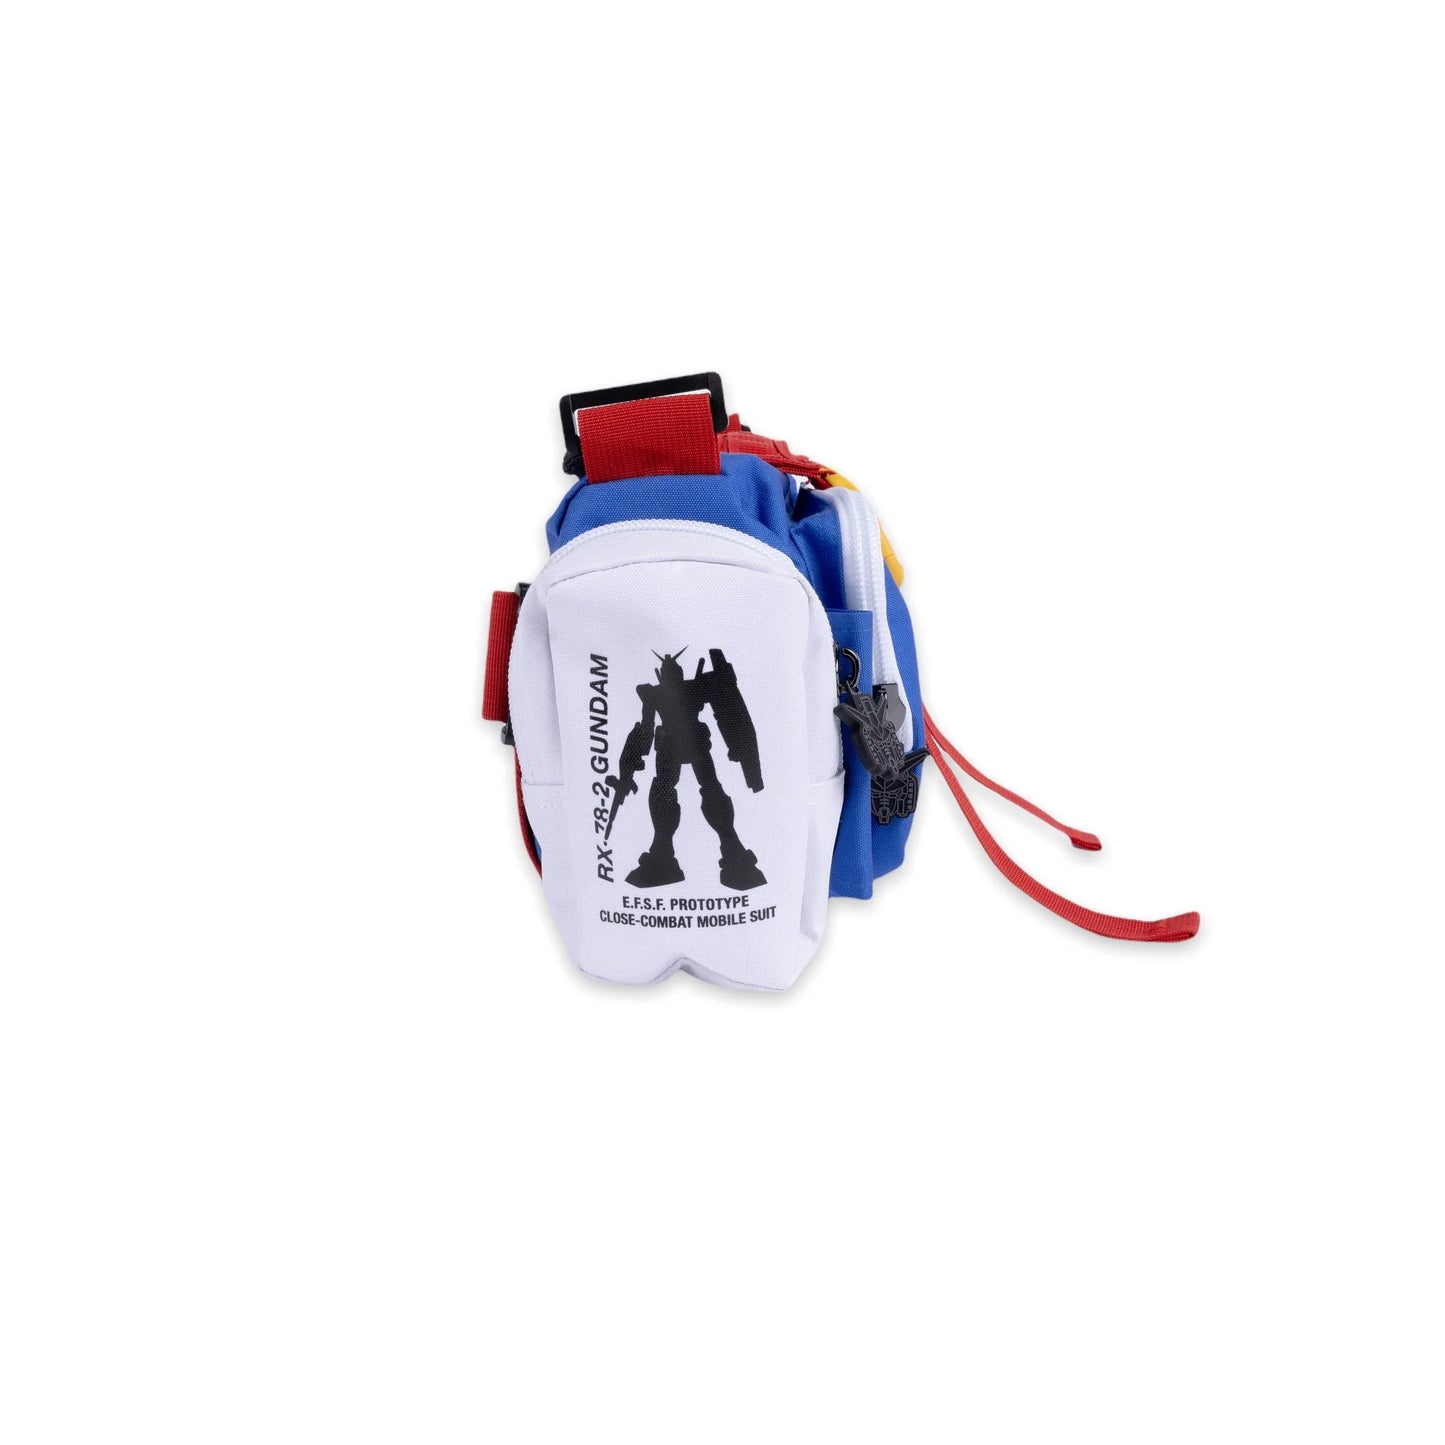 SHWA - RX78 Mini Duffle with Strap (Pre-Order) Patches Included